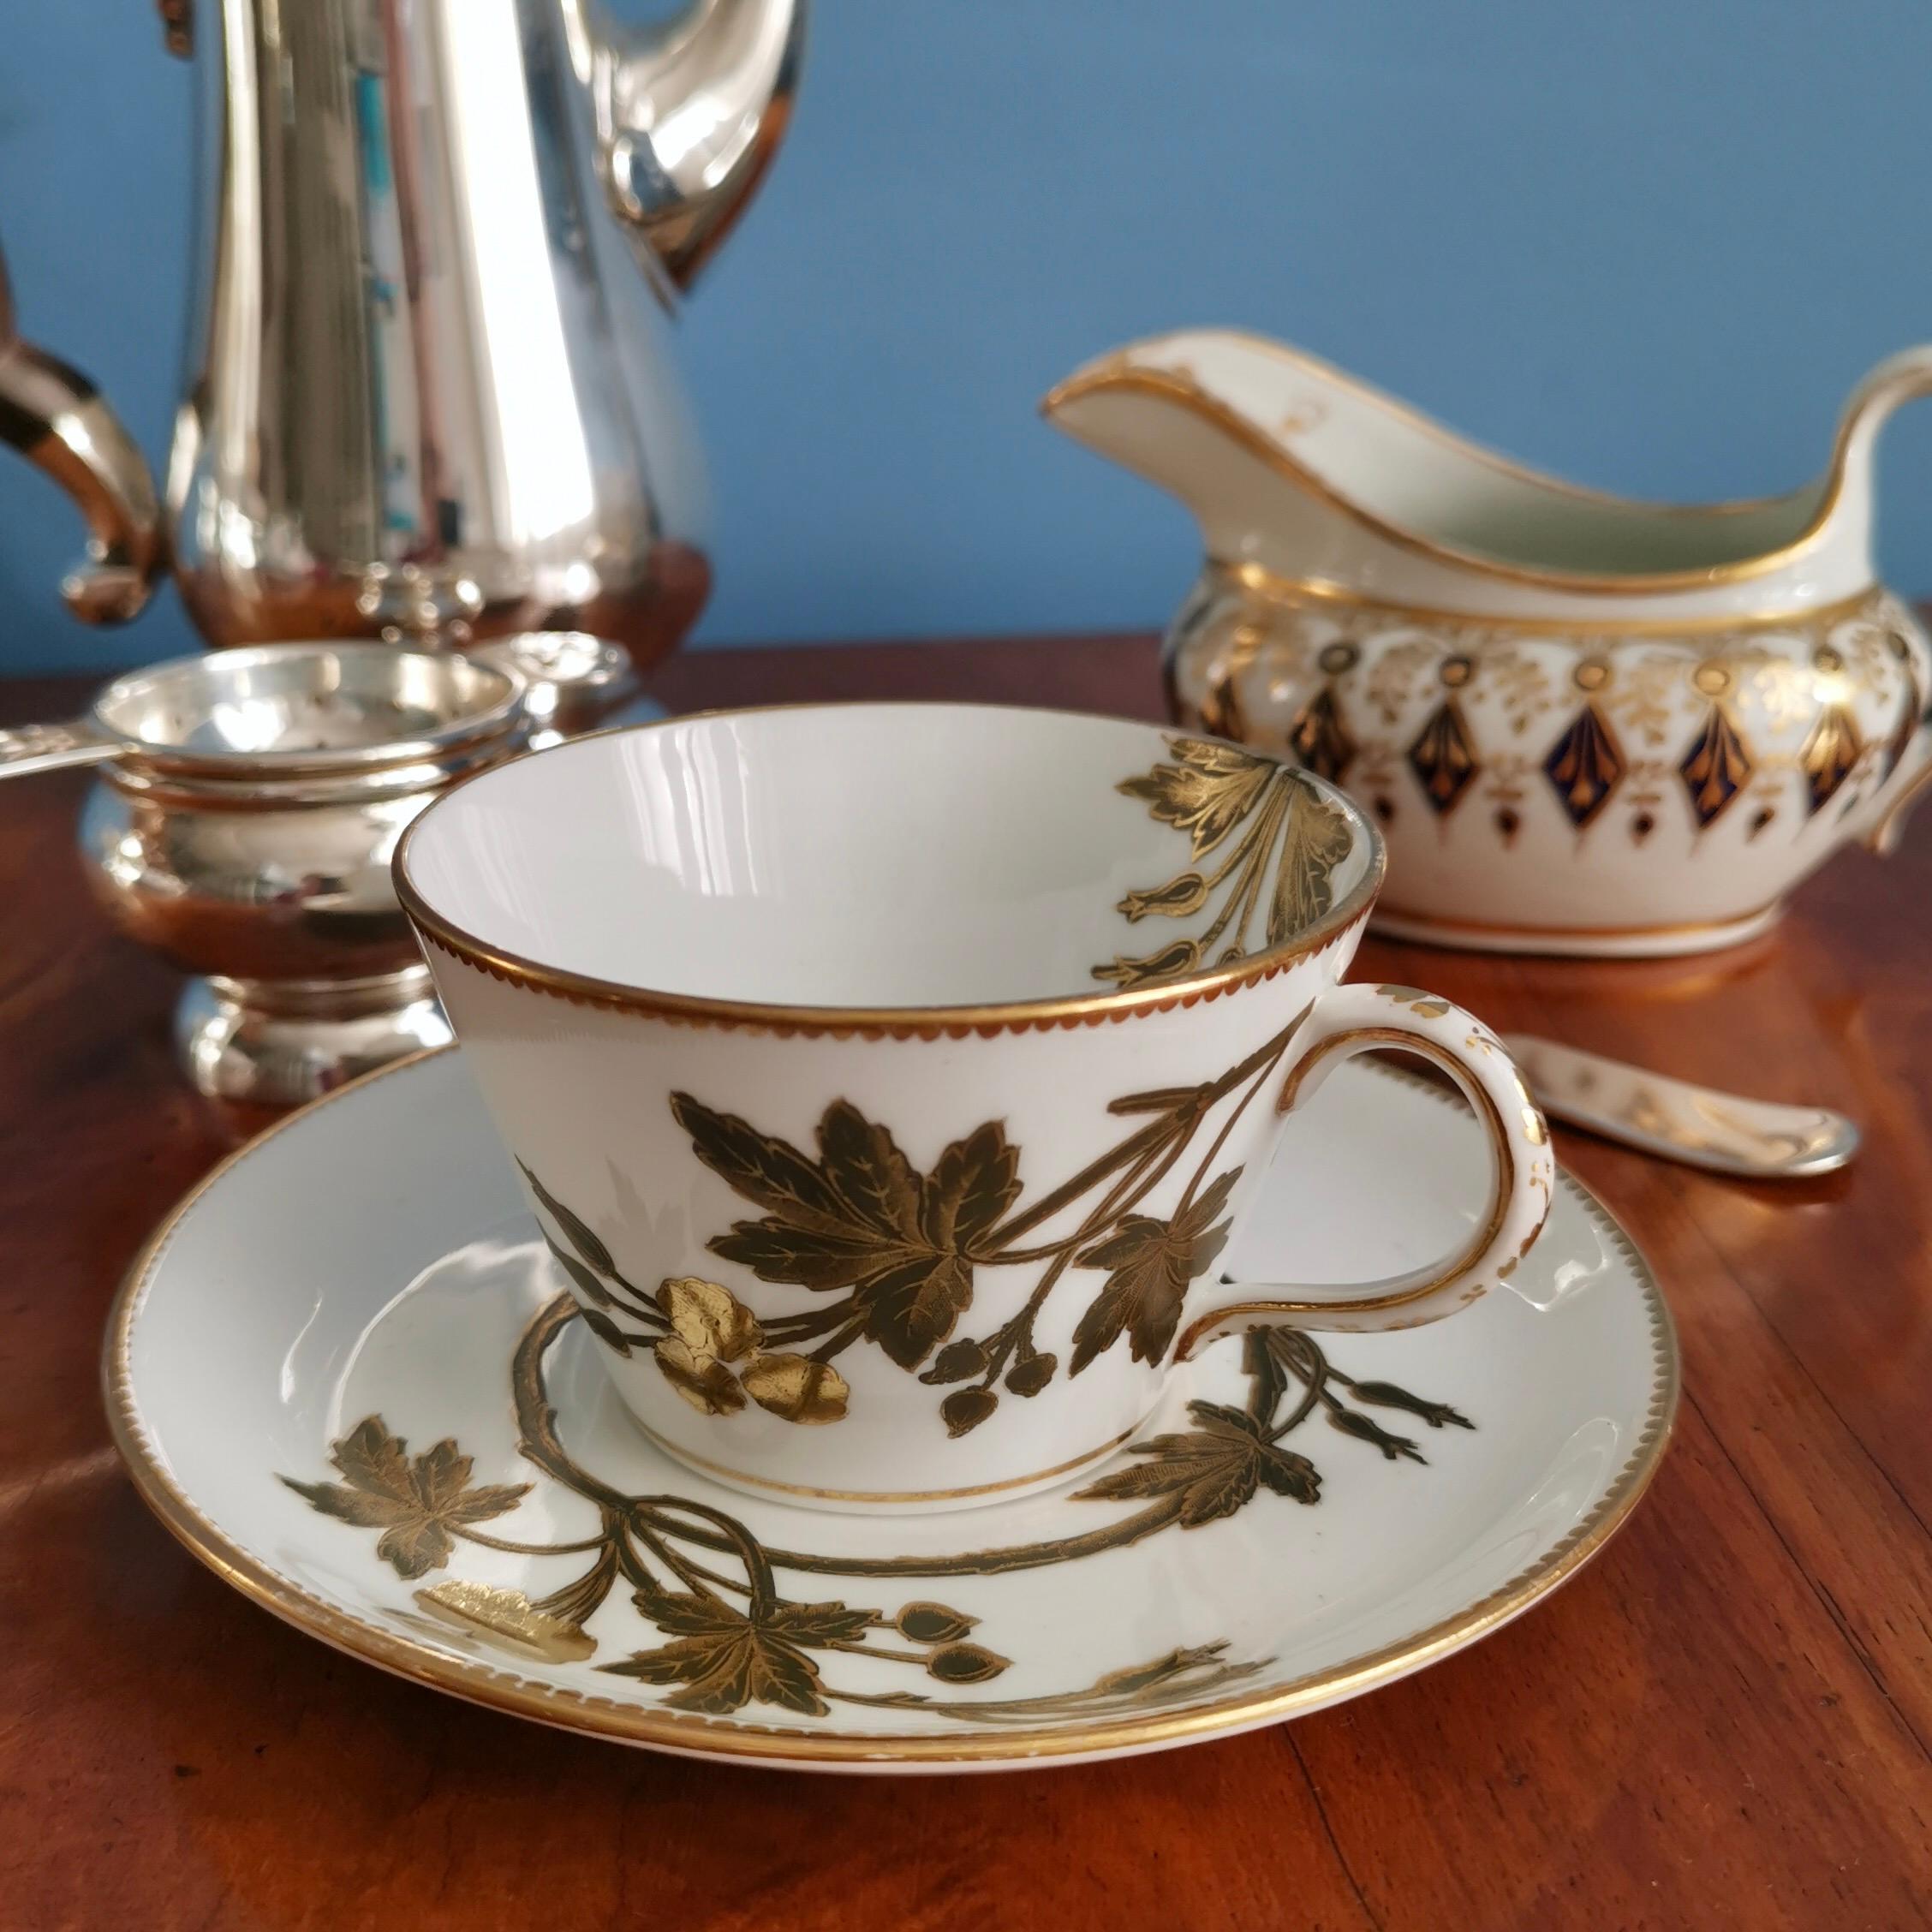 This is a beautiful teacup and saucer made by an unknown factory probably in Staffordshire in about 1875. The cup has a nice clean bucket shape with a loop handle with a gilt motif, and the set is decorated with a beautiful Aesthetic Movement design